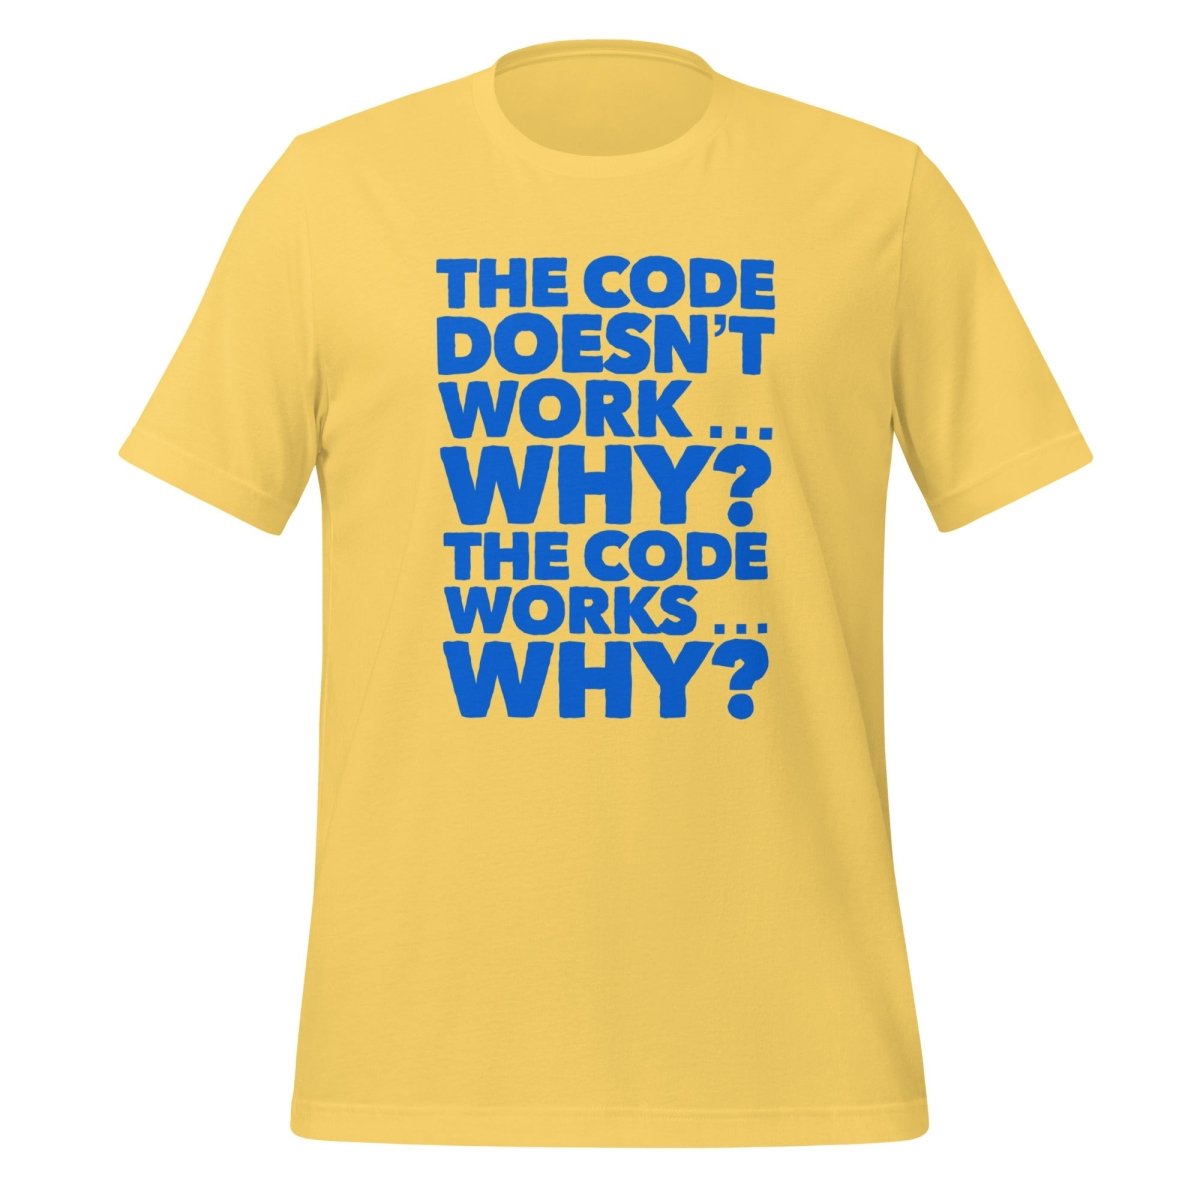 The code doesn't work, why? T - Shirt 2 (unisex) - Yellow - AI Store